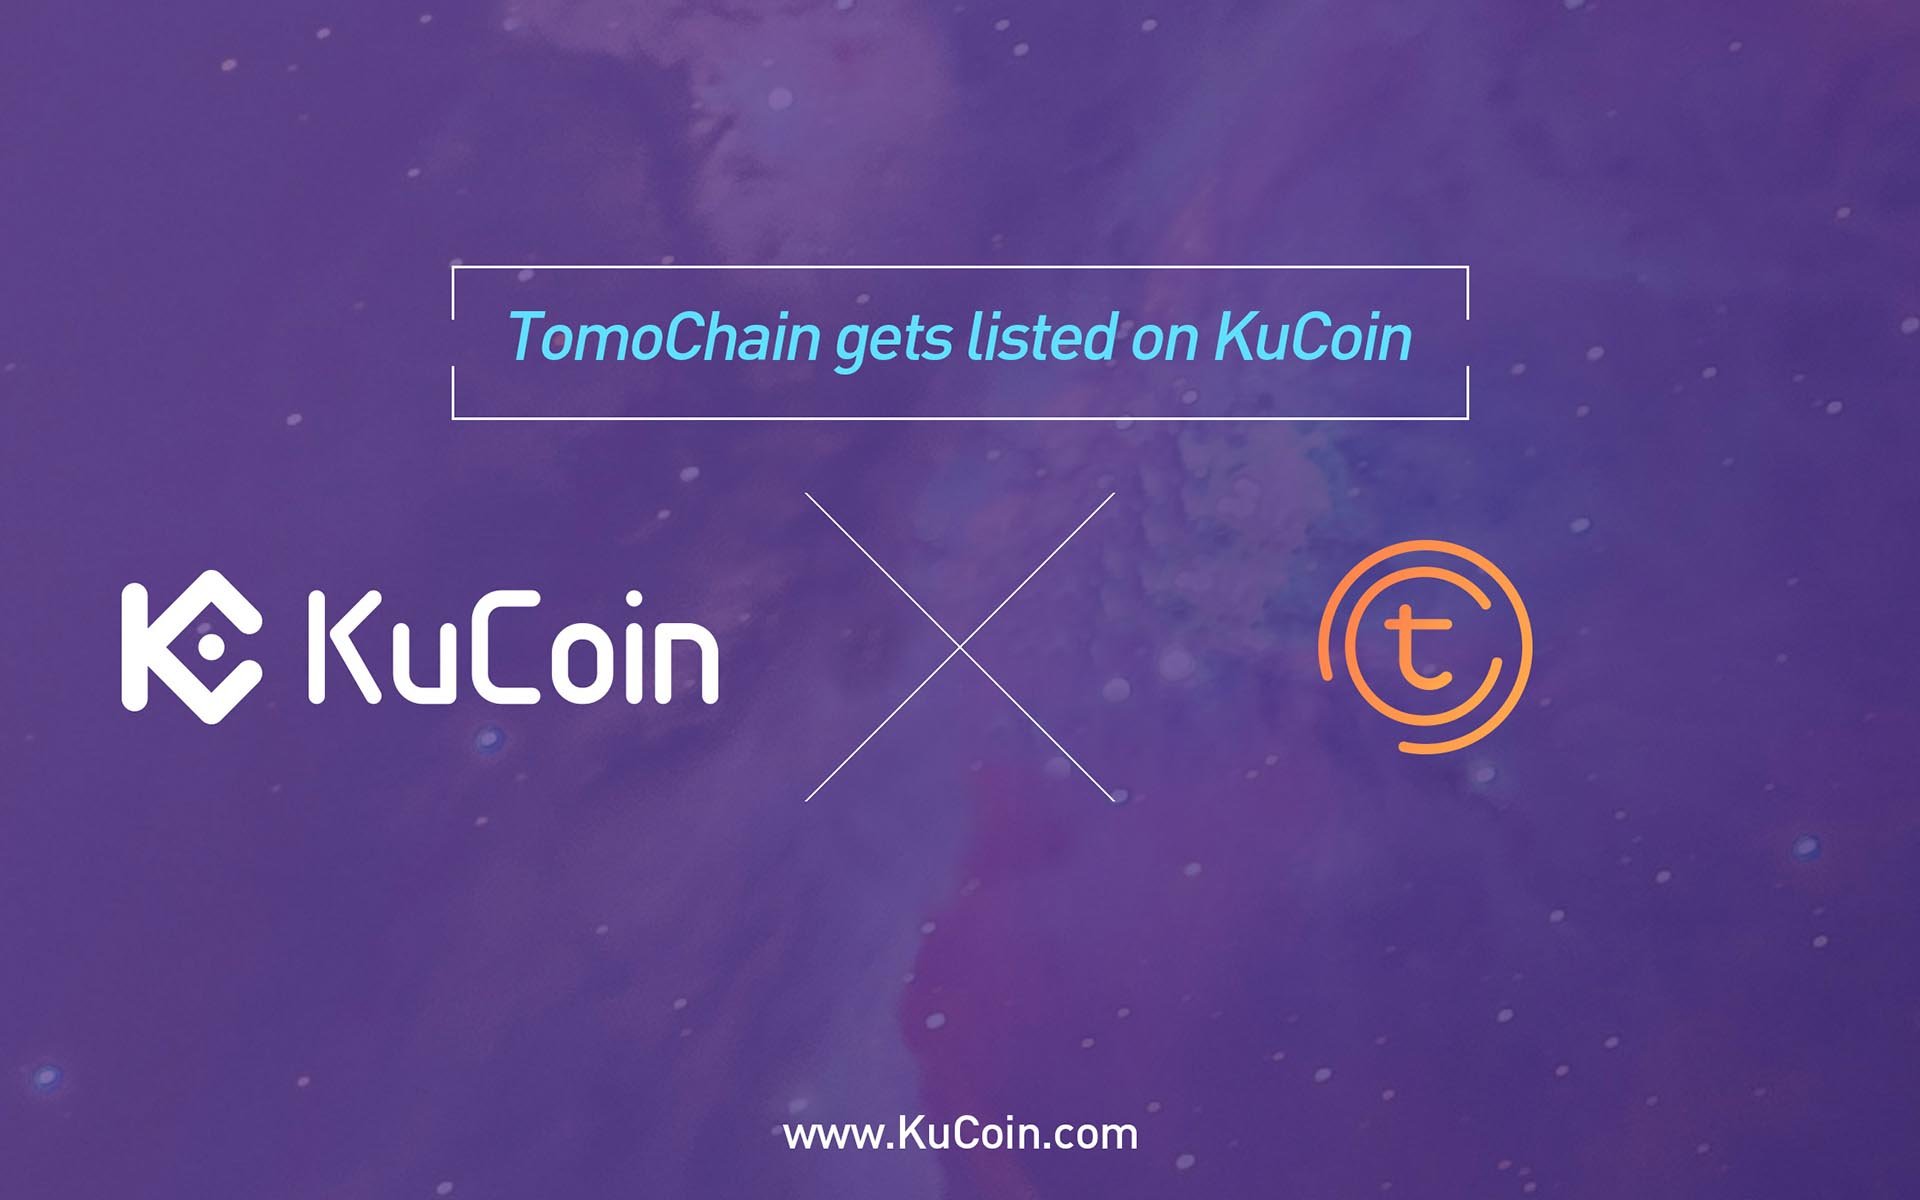 TomoChain (TOMO) Gets Listed on KuCoin!